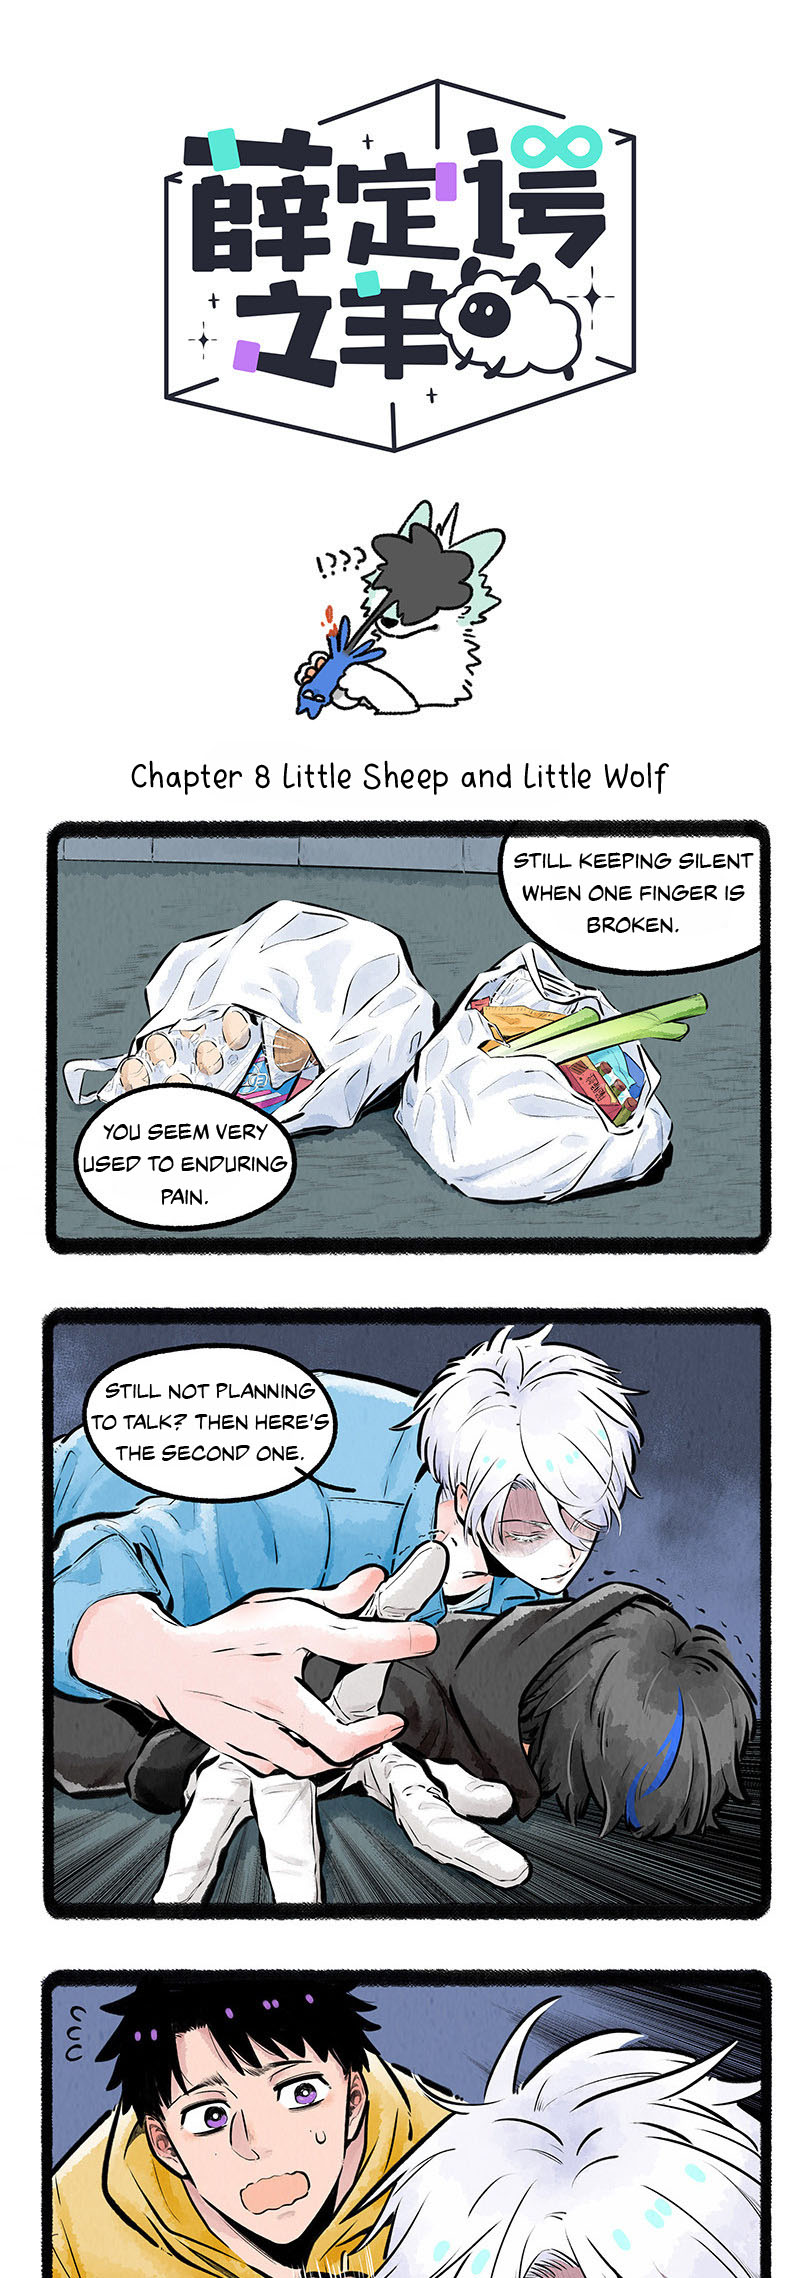 Schrödinger's Sheep Chapter 8: Little Sheep And Little Wolf - Picture 2